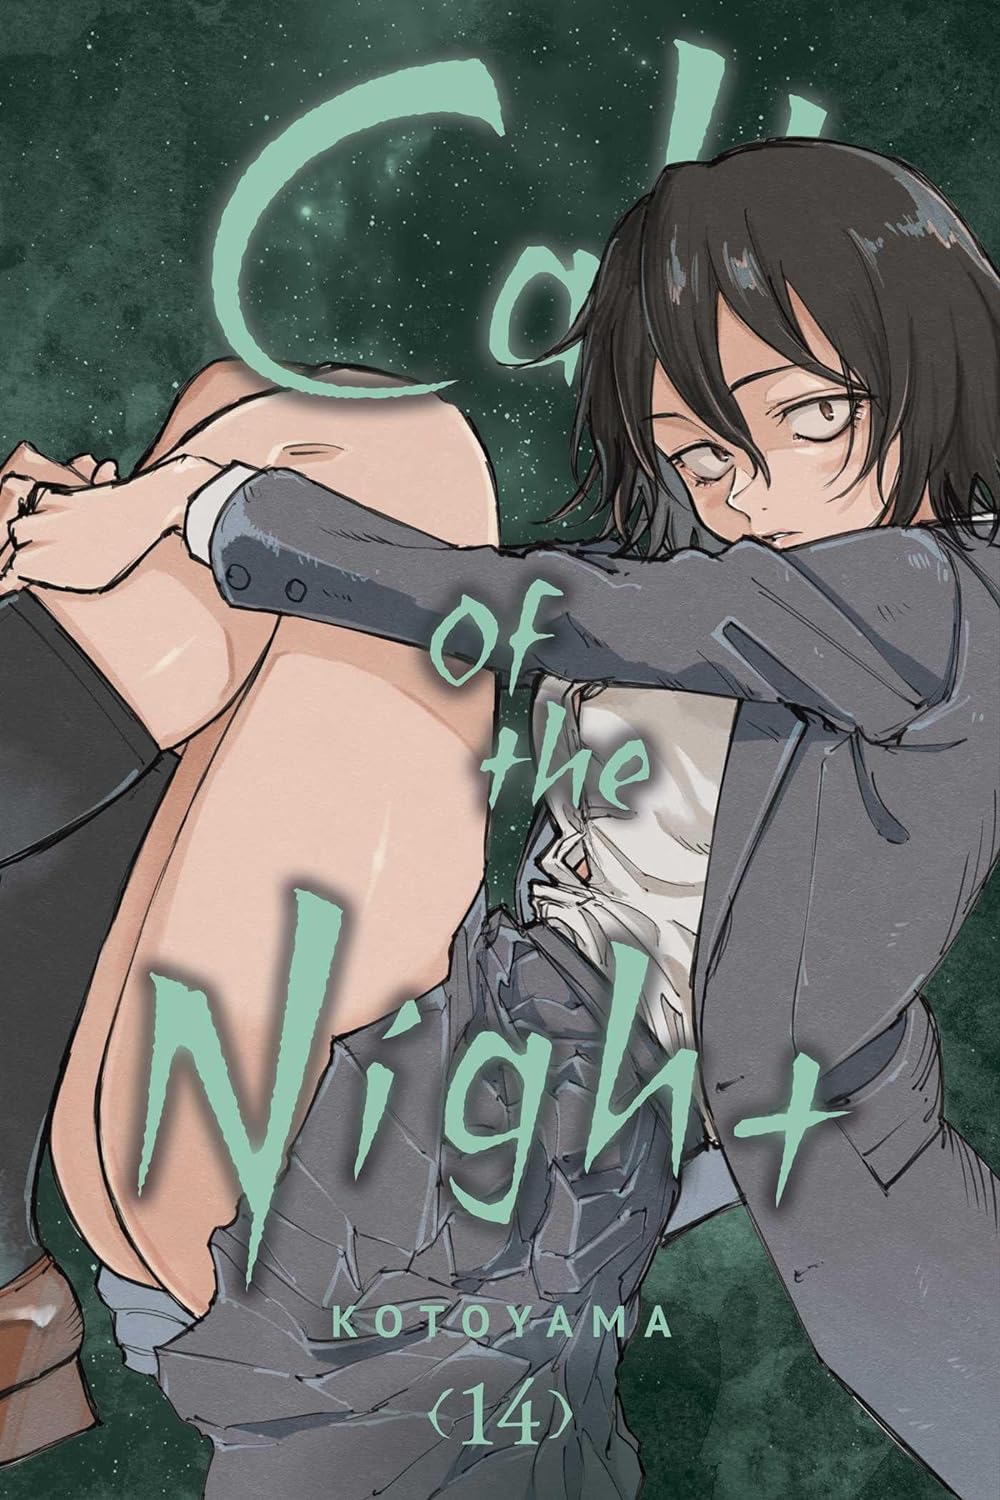 (12/12/2023) Call of the Night Vol. 14